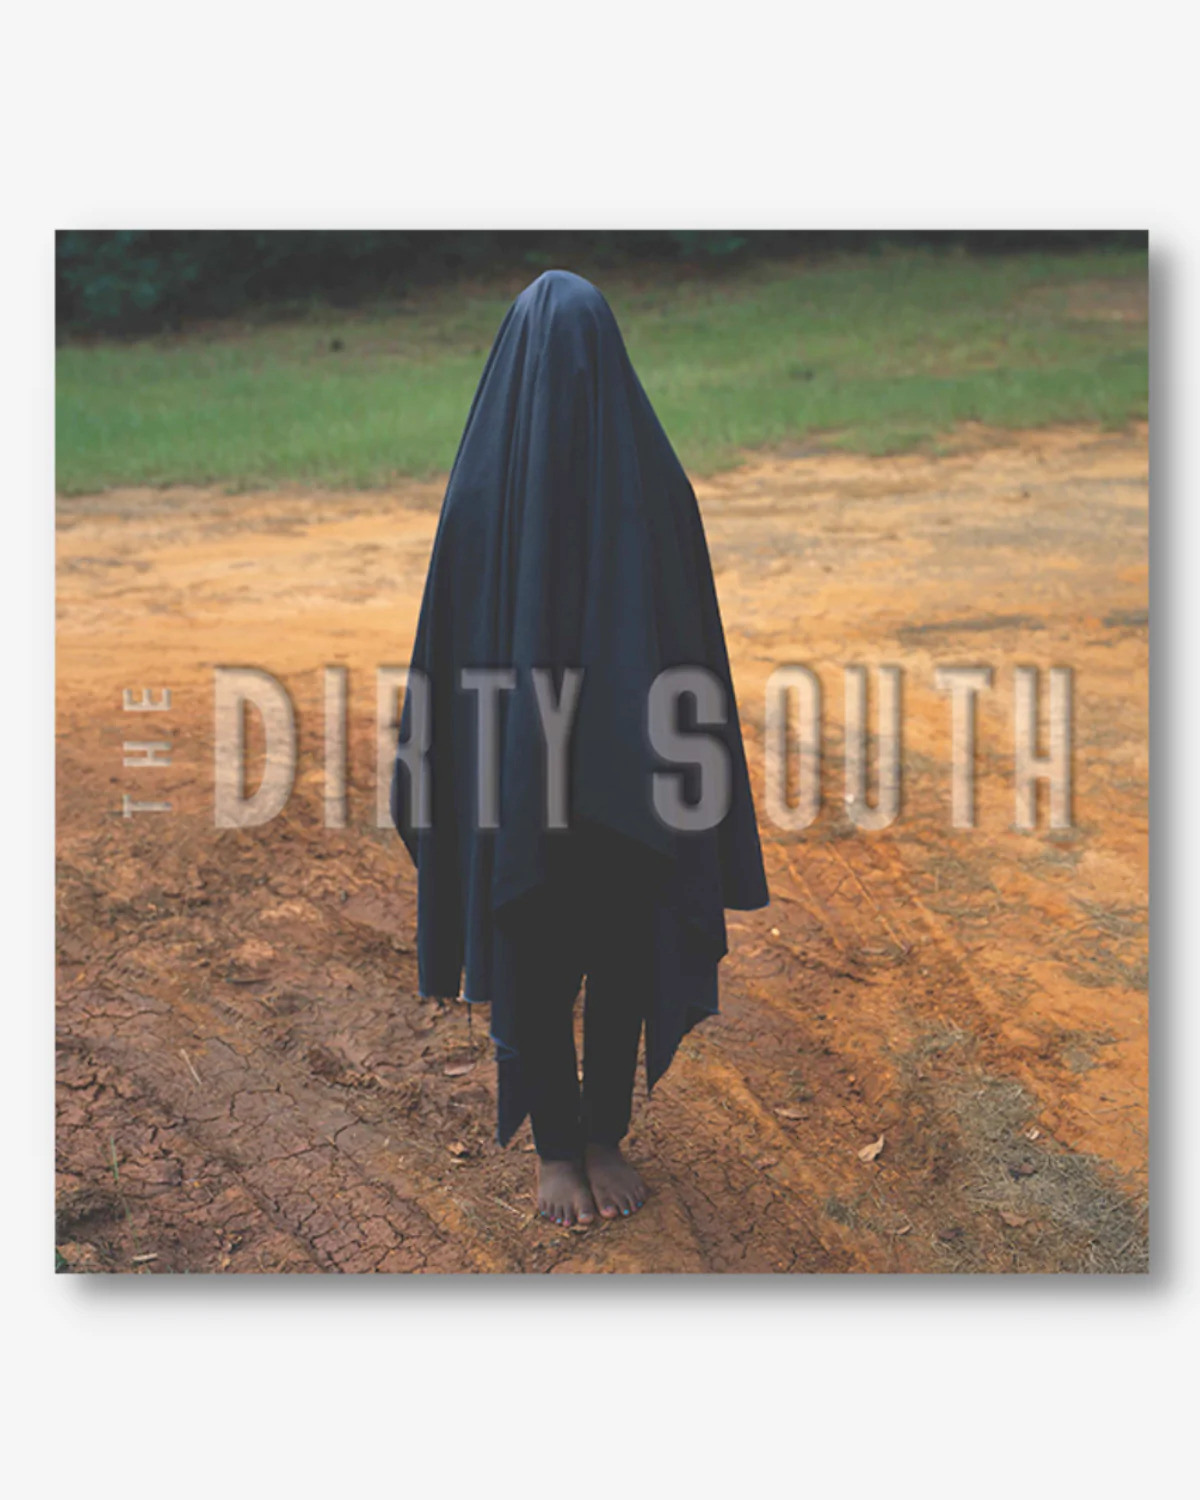 Catalogue with an image of a figure standing barefoot in red dirt, covered in a long black sheet-like material on it. Text on the catalogue reads, "The Dirty South". 